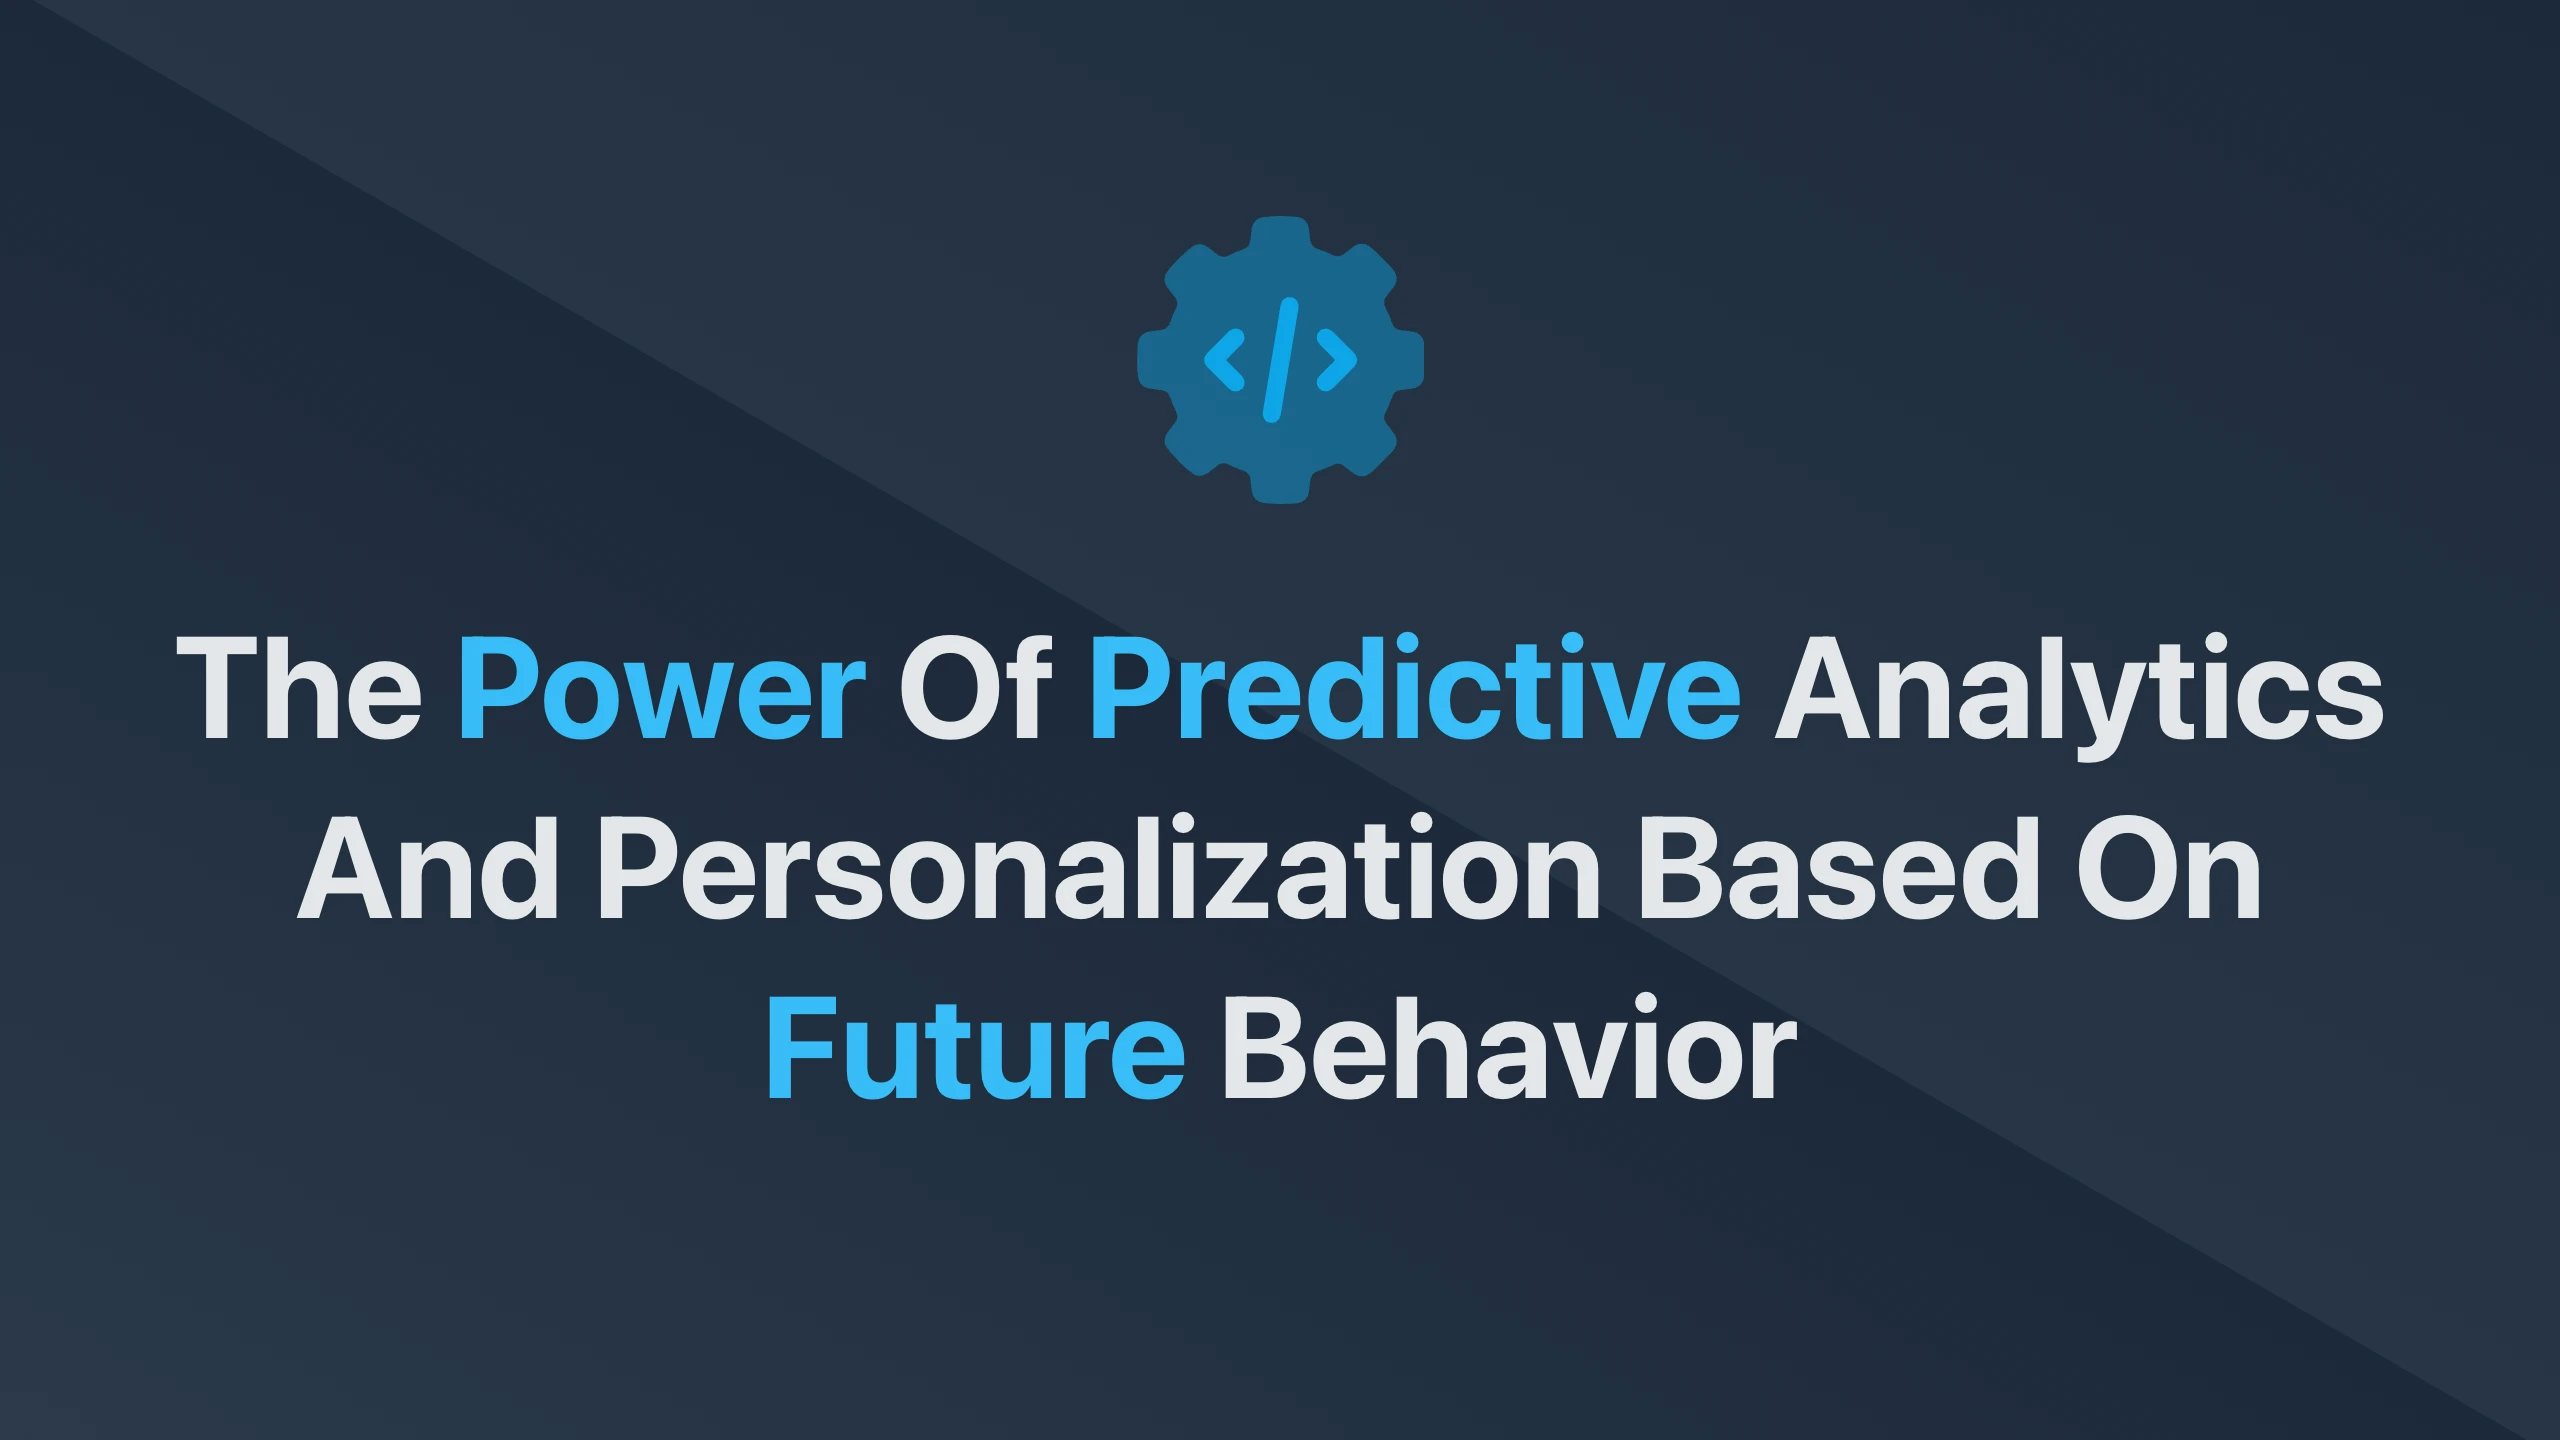 Cover Image for The Power of Predictive Analytics and Personalization Based on Future Behavior